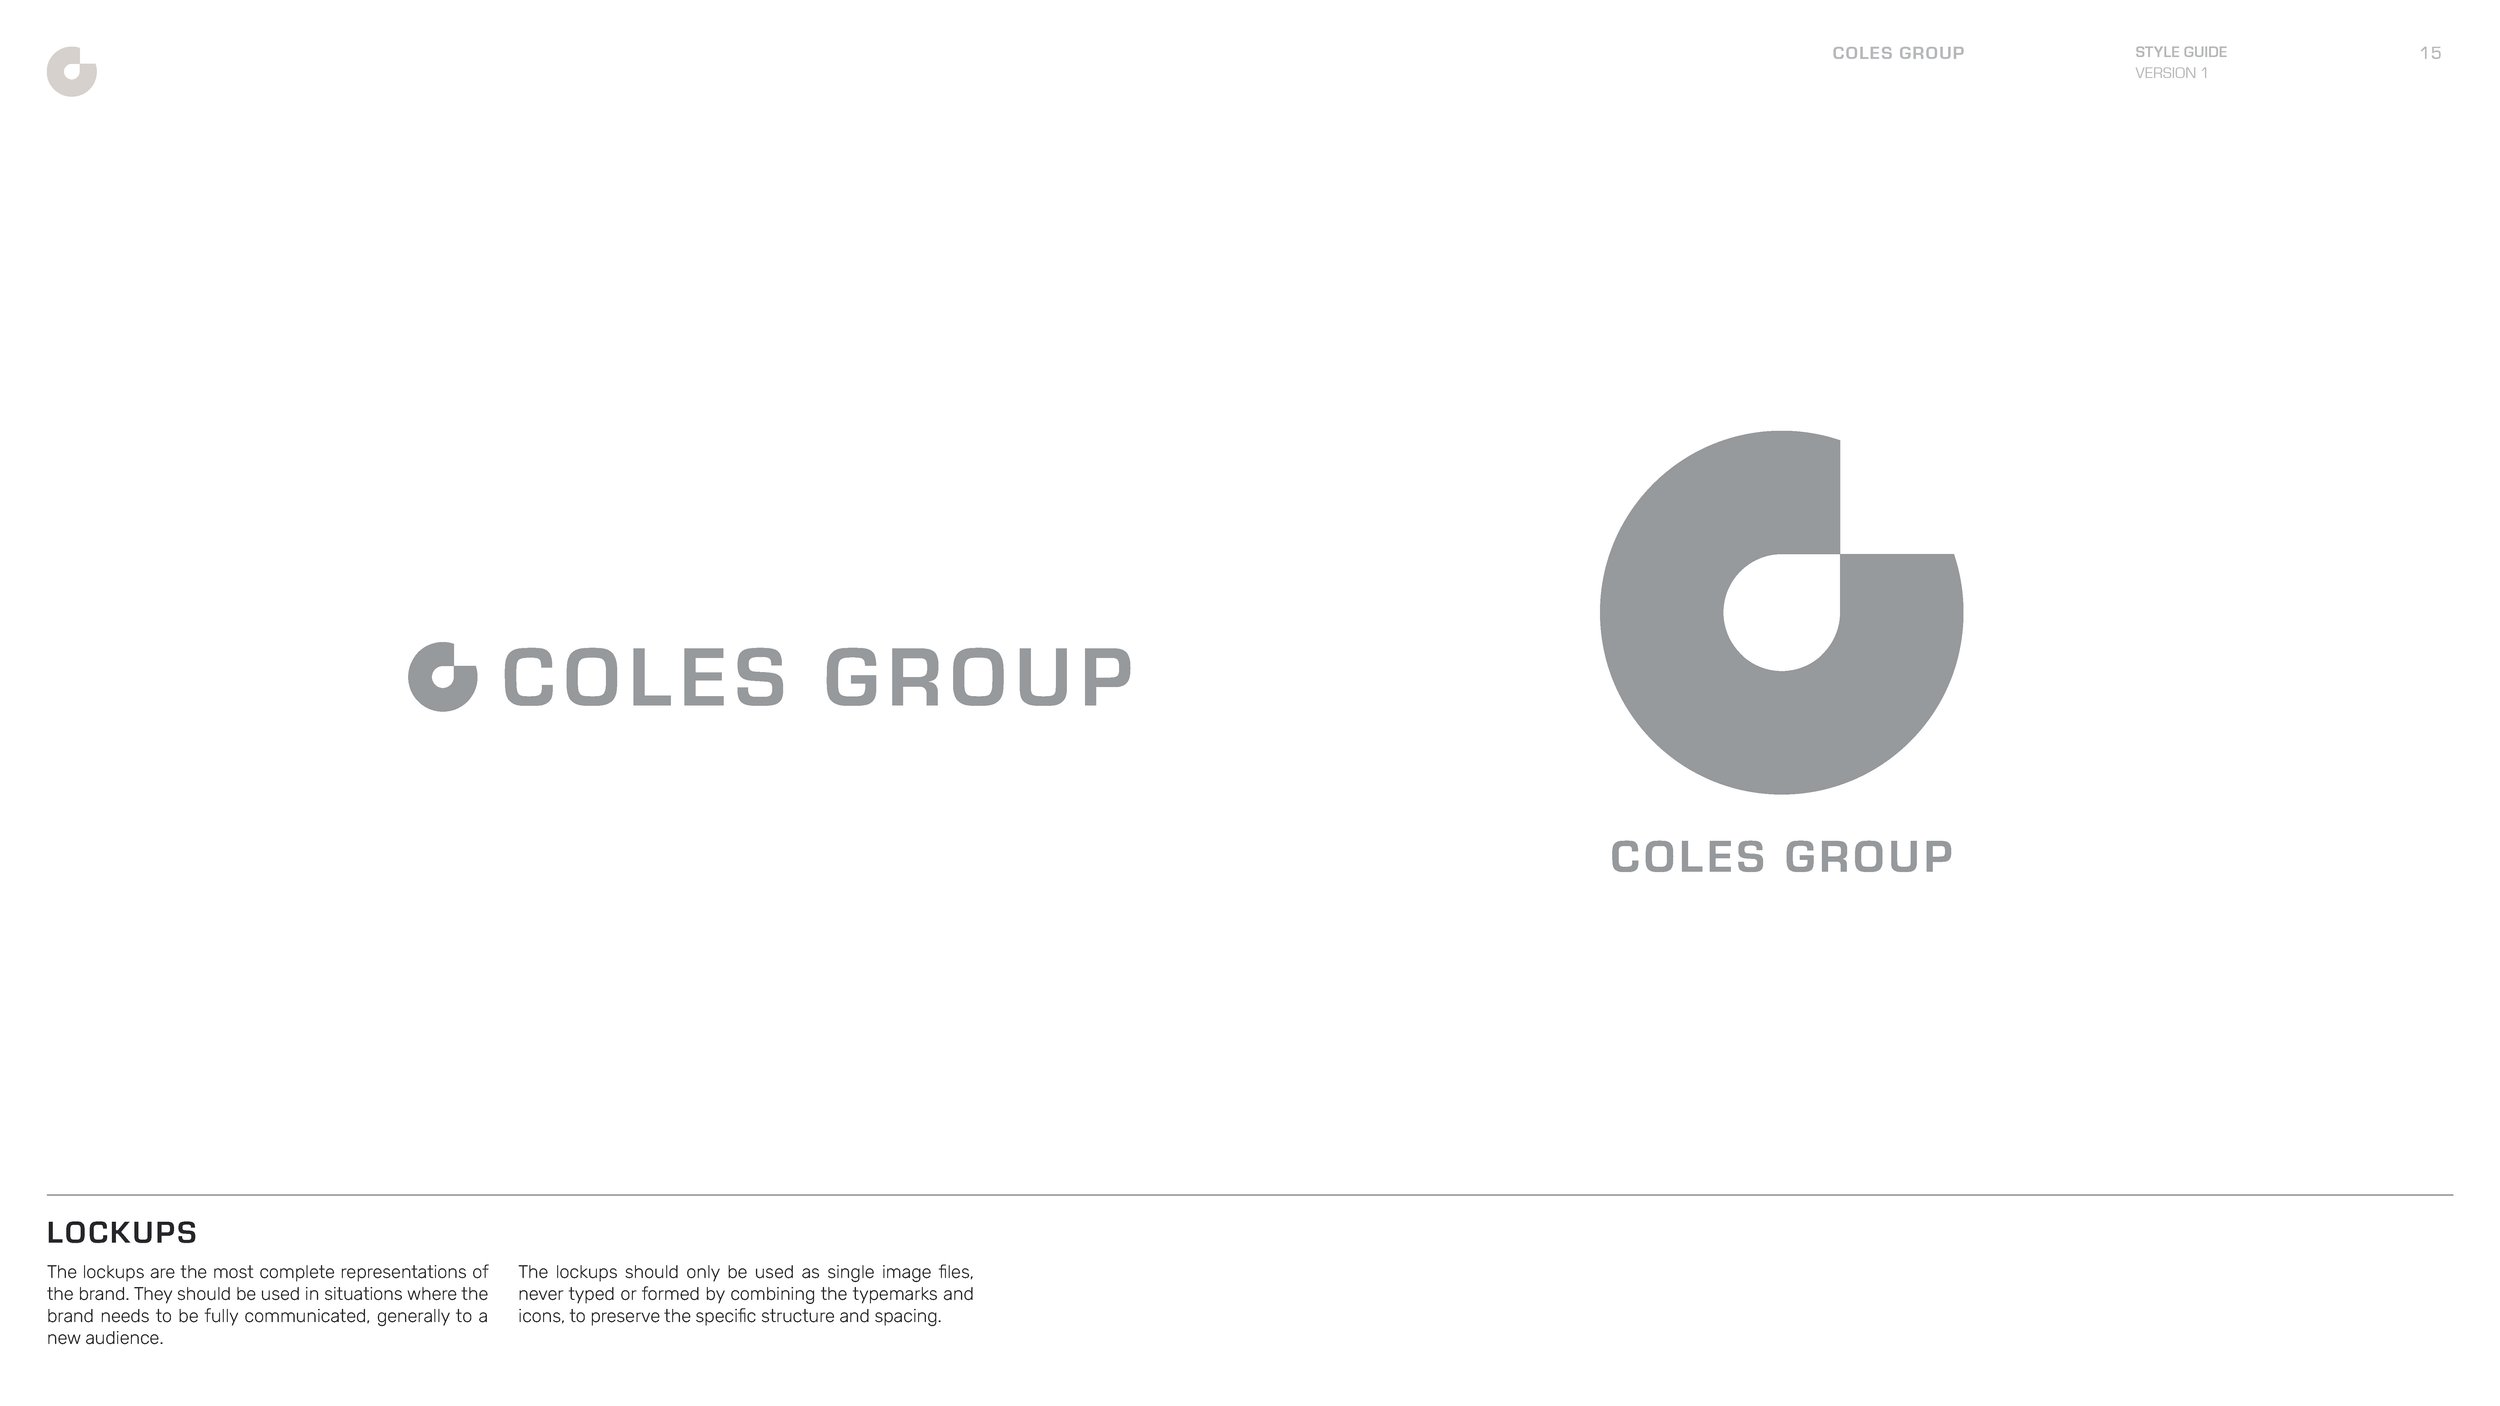 Coles-Group_Brand Guidelines_060321_Page_15.jpg